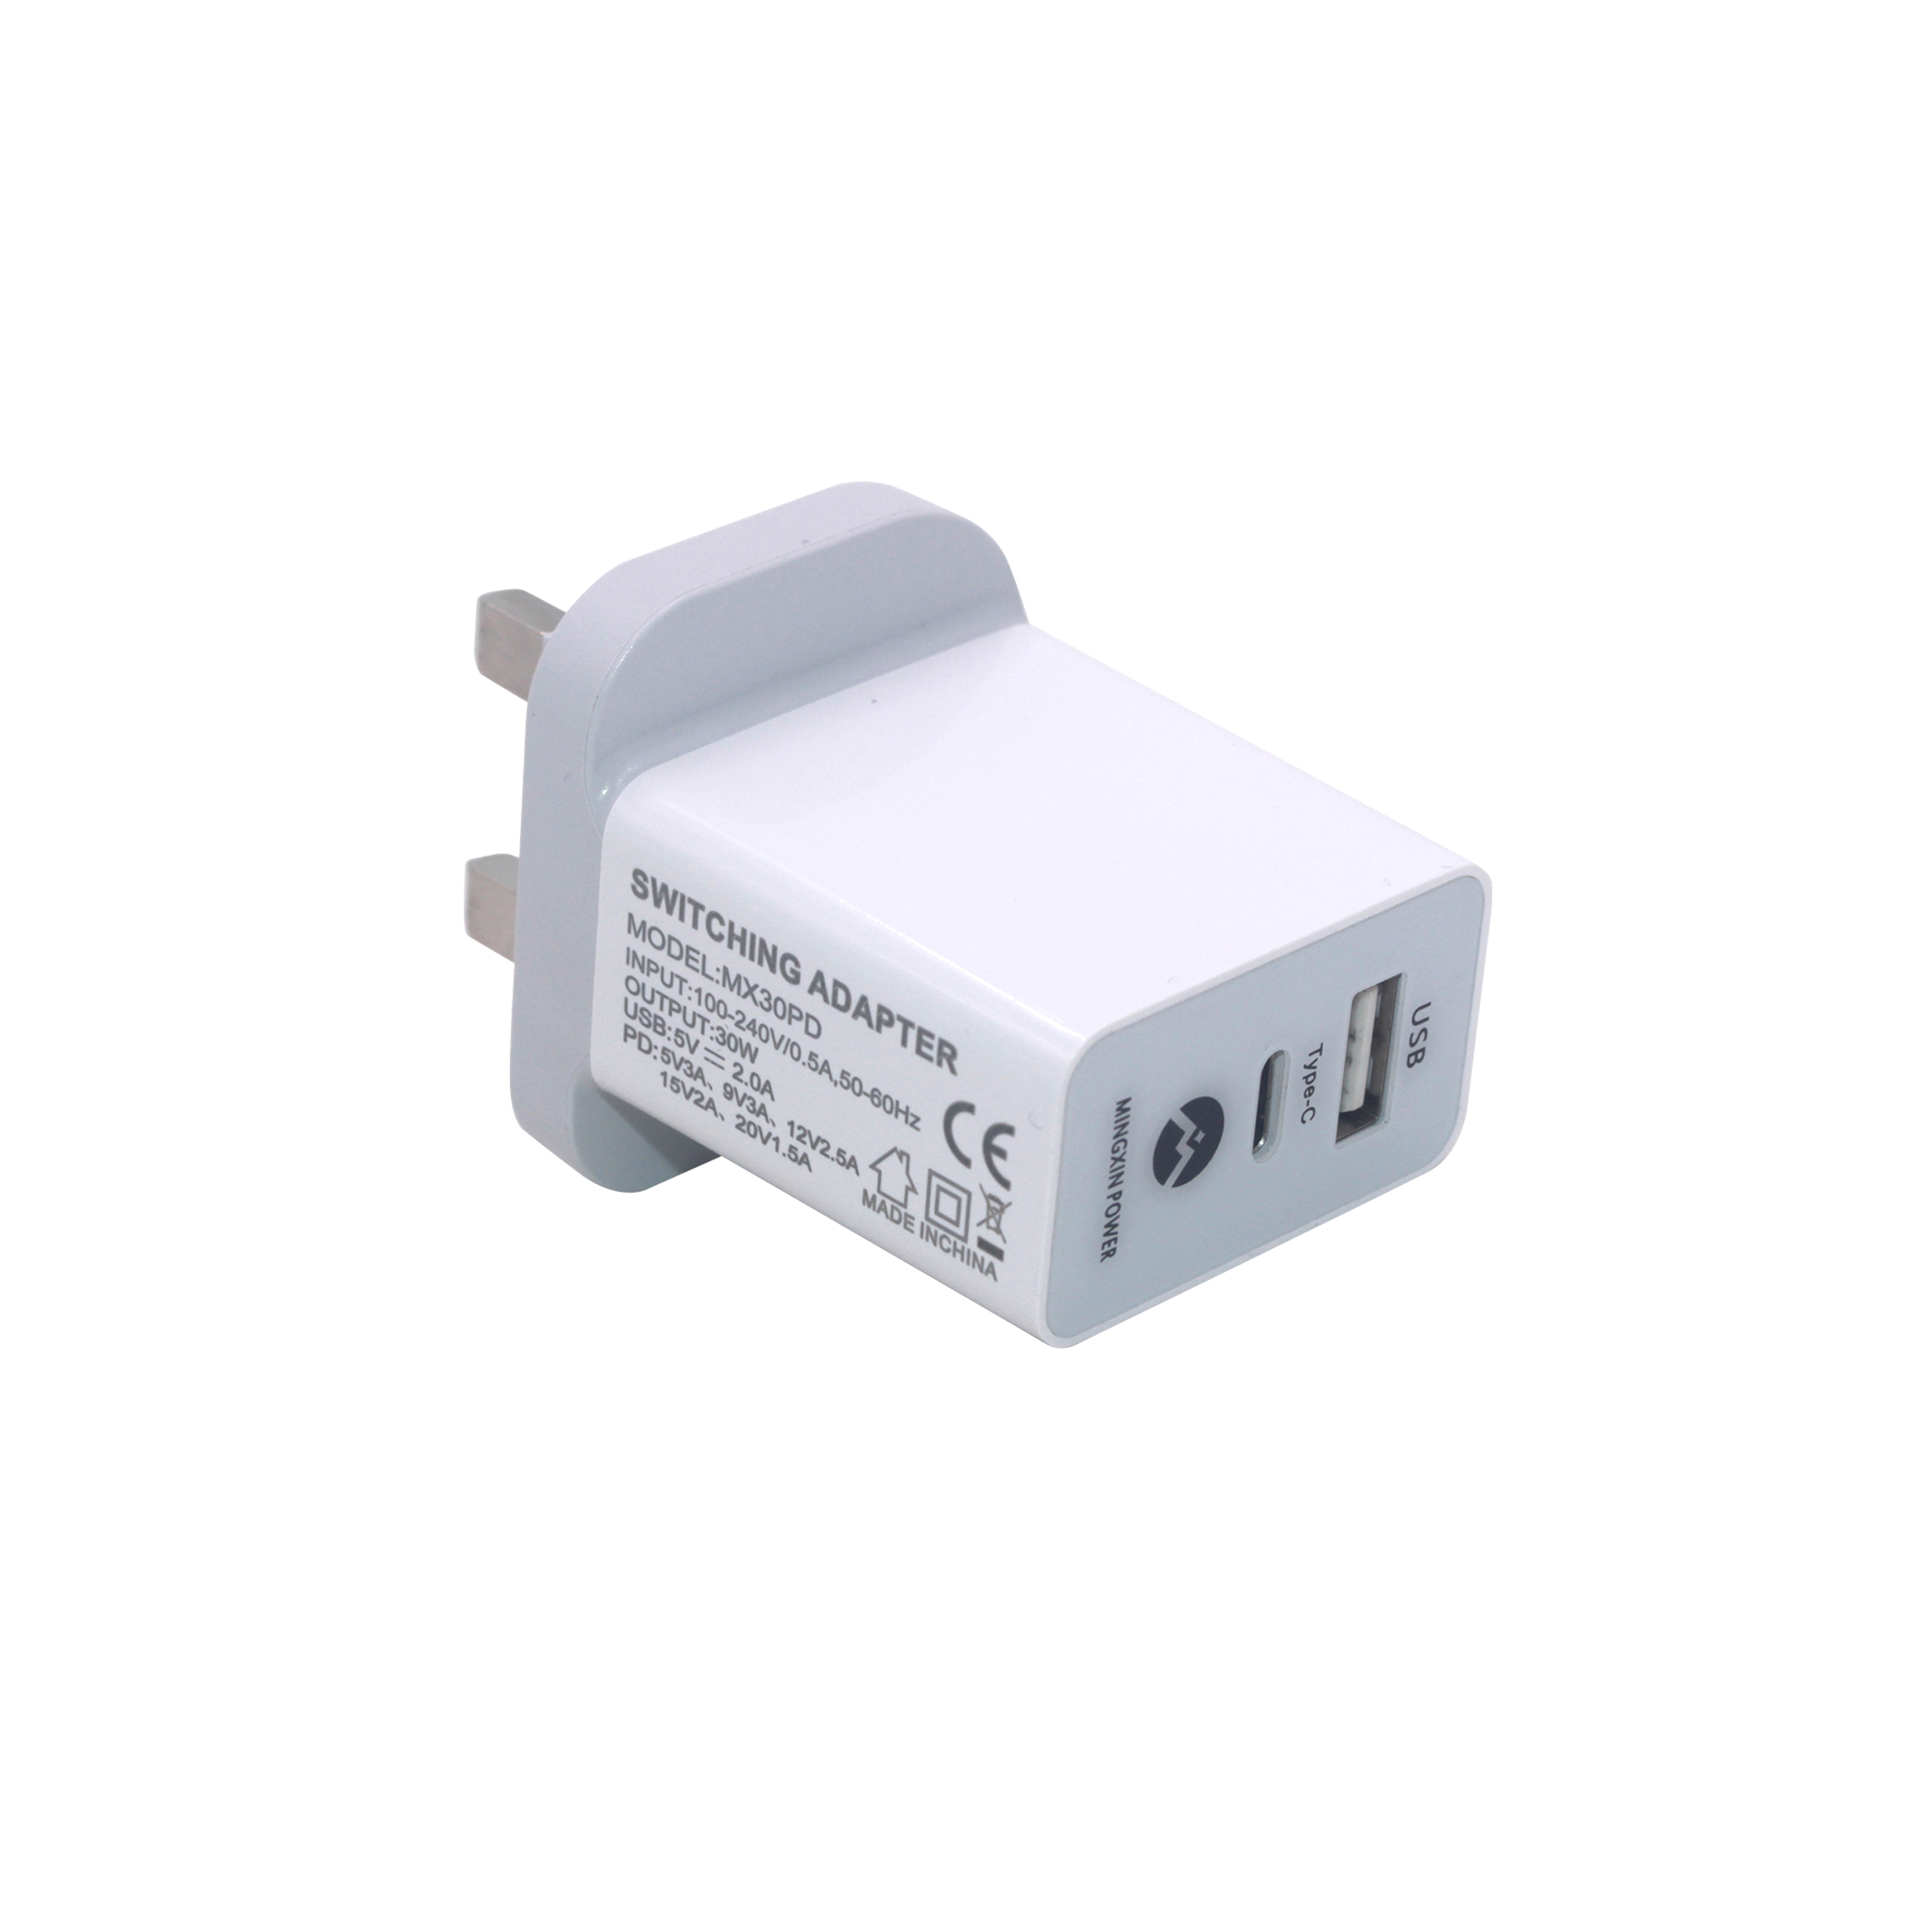 30w type-c PD charger with UK plug 